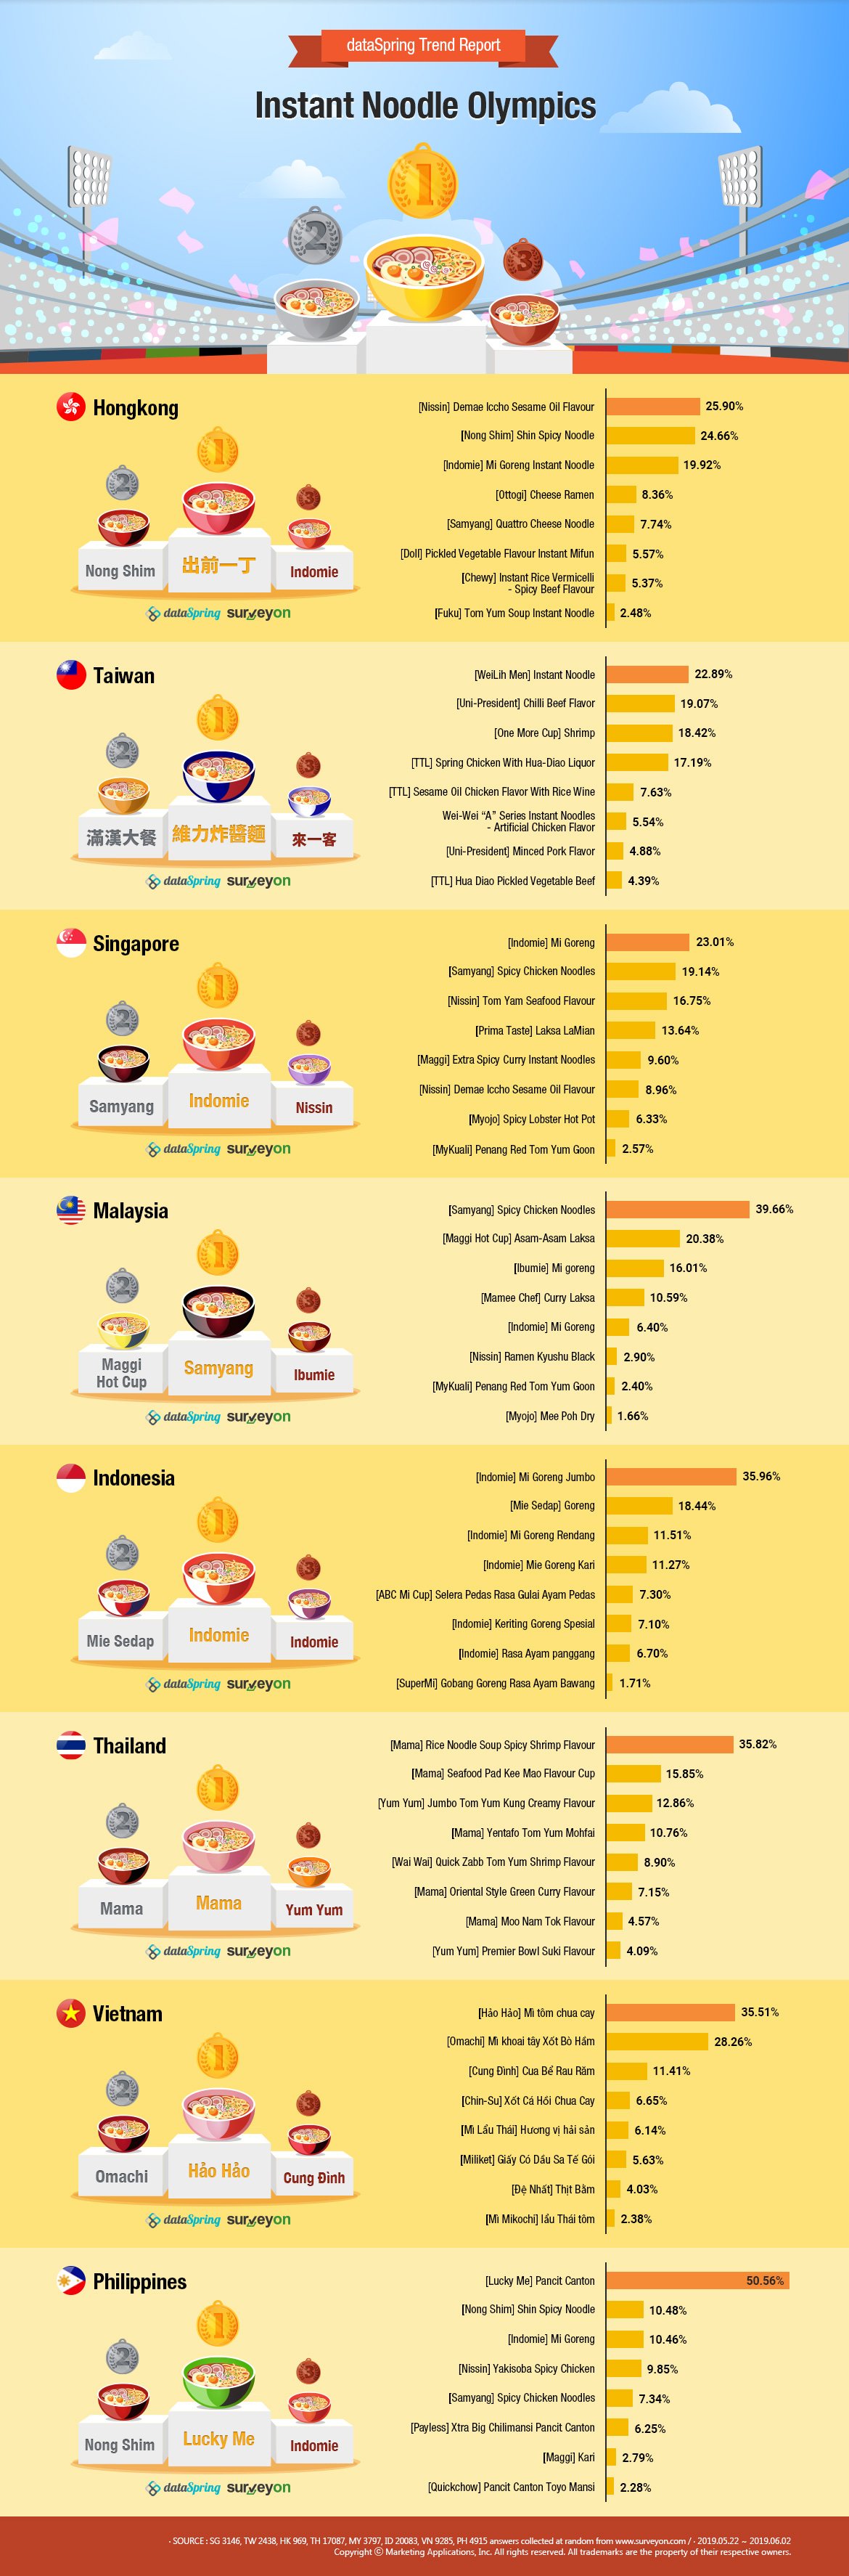 Asia Research Poll: Instant Noodle Olympics 